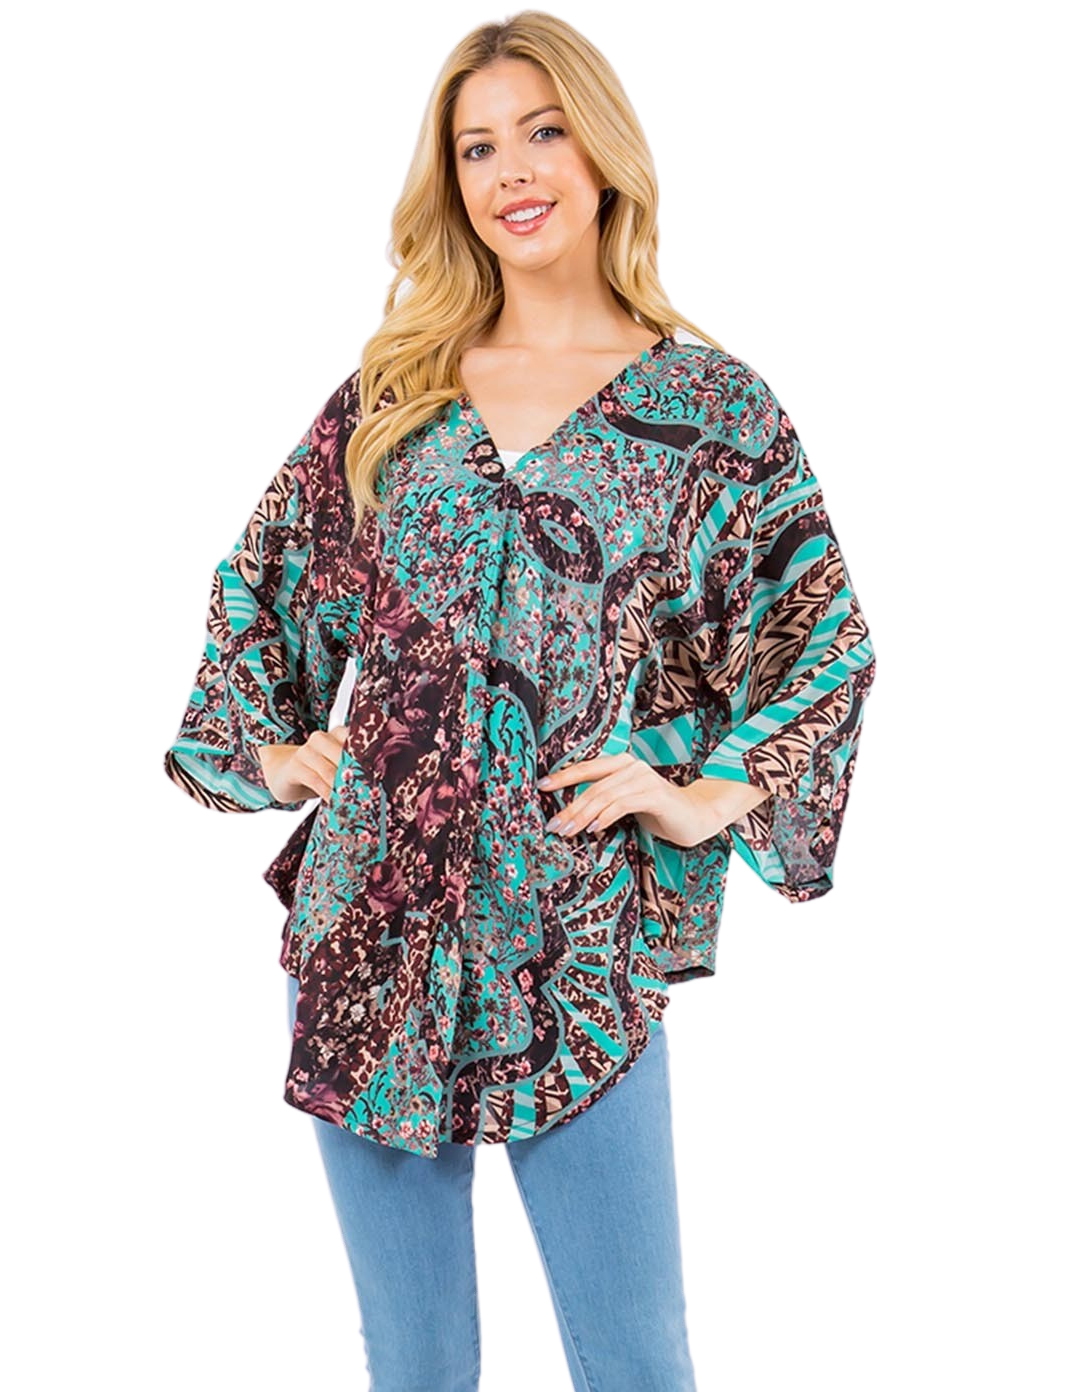 wholesale 3779 - V-Neck Poncho with Sleeves 3779/4256/